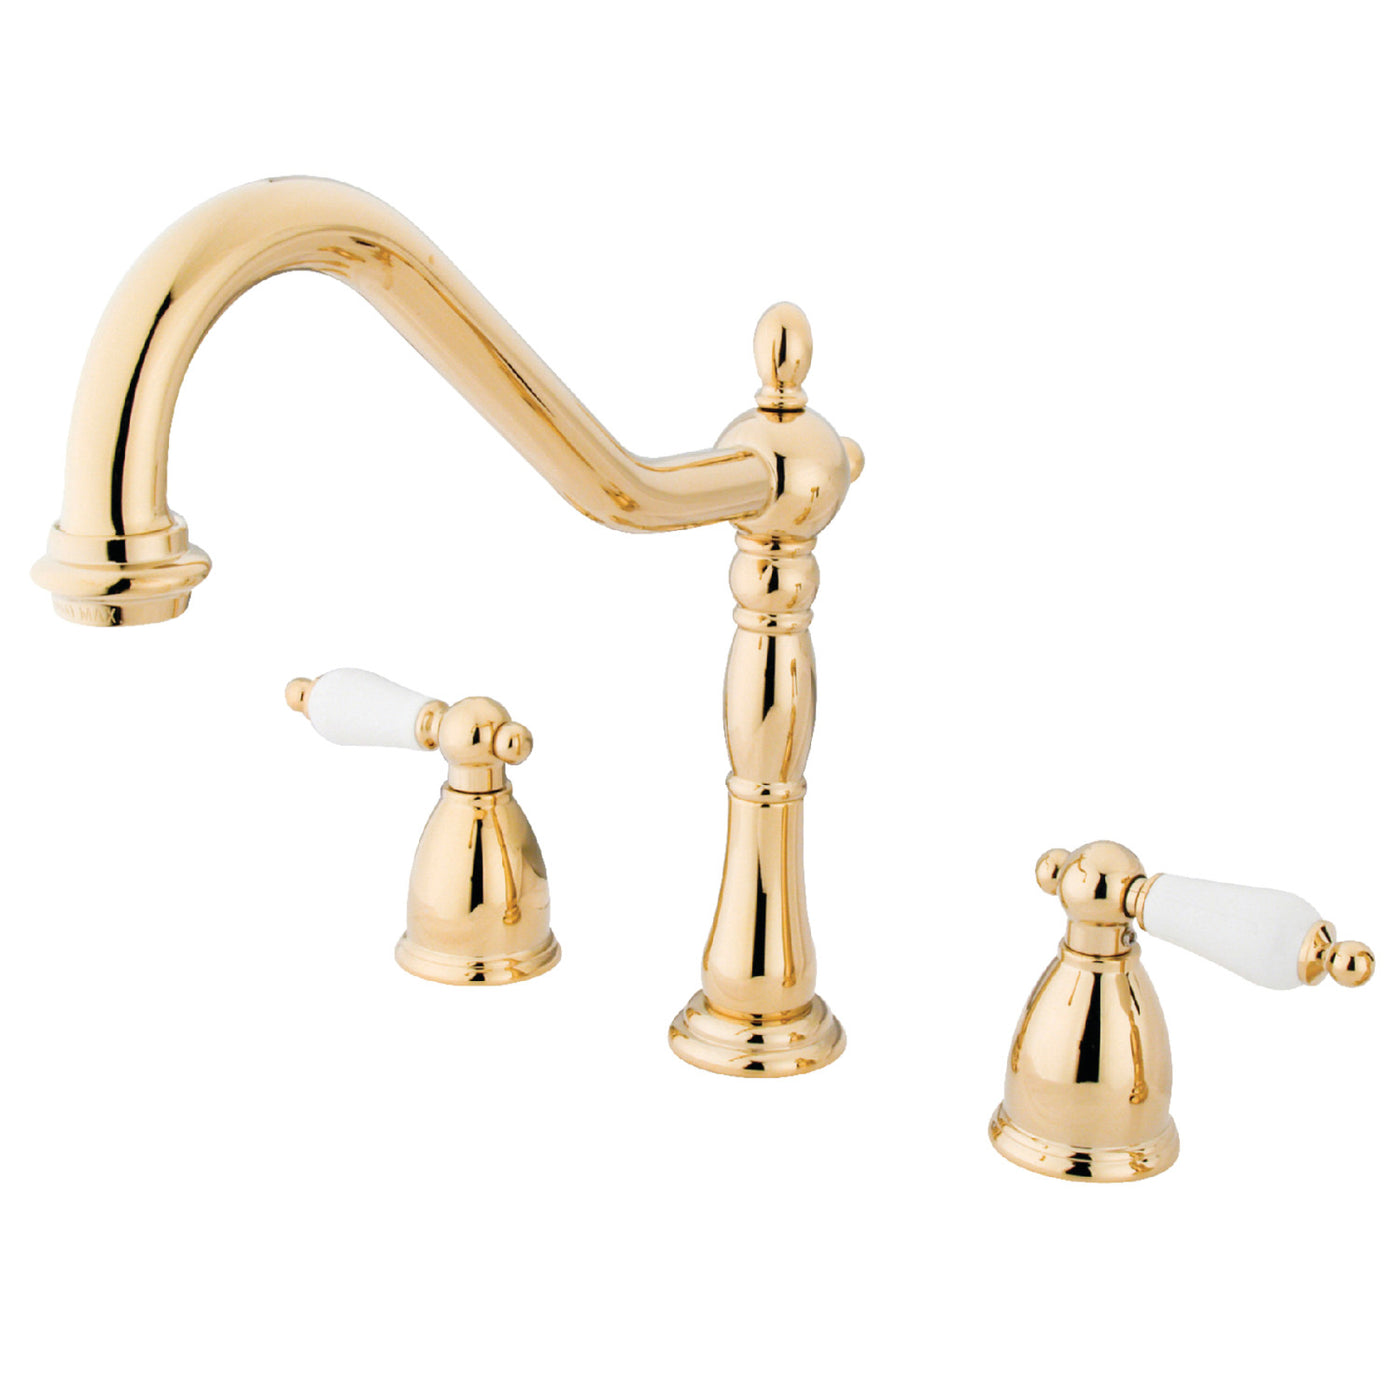 Elements of Design EB1792PLLS Widespread Kitchen Faucet, Polished Brass